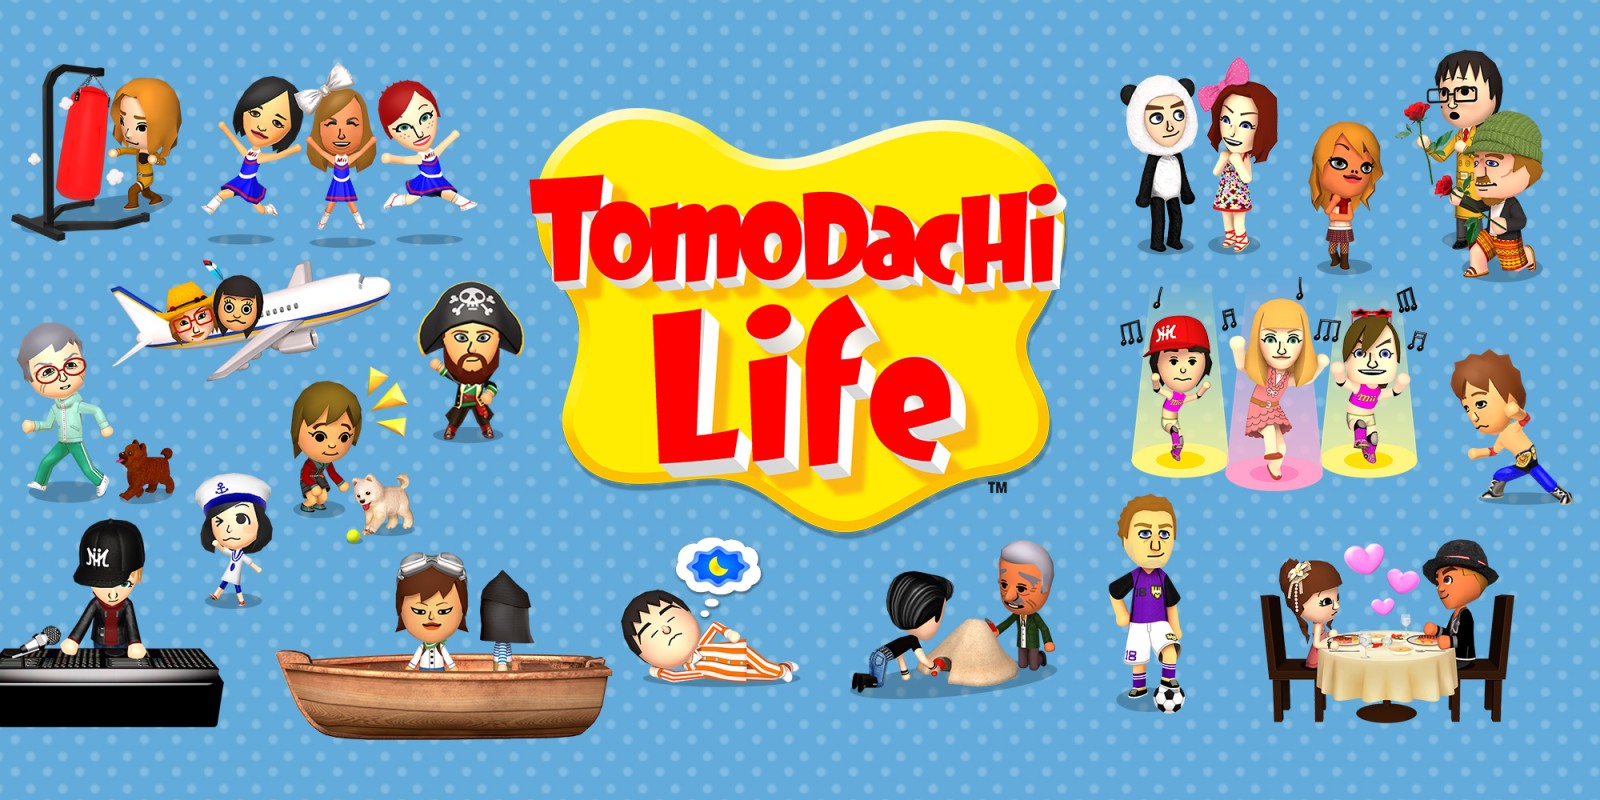 Tomodachi life personality guide user